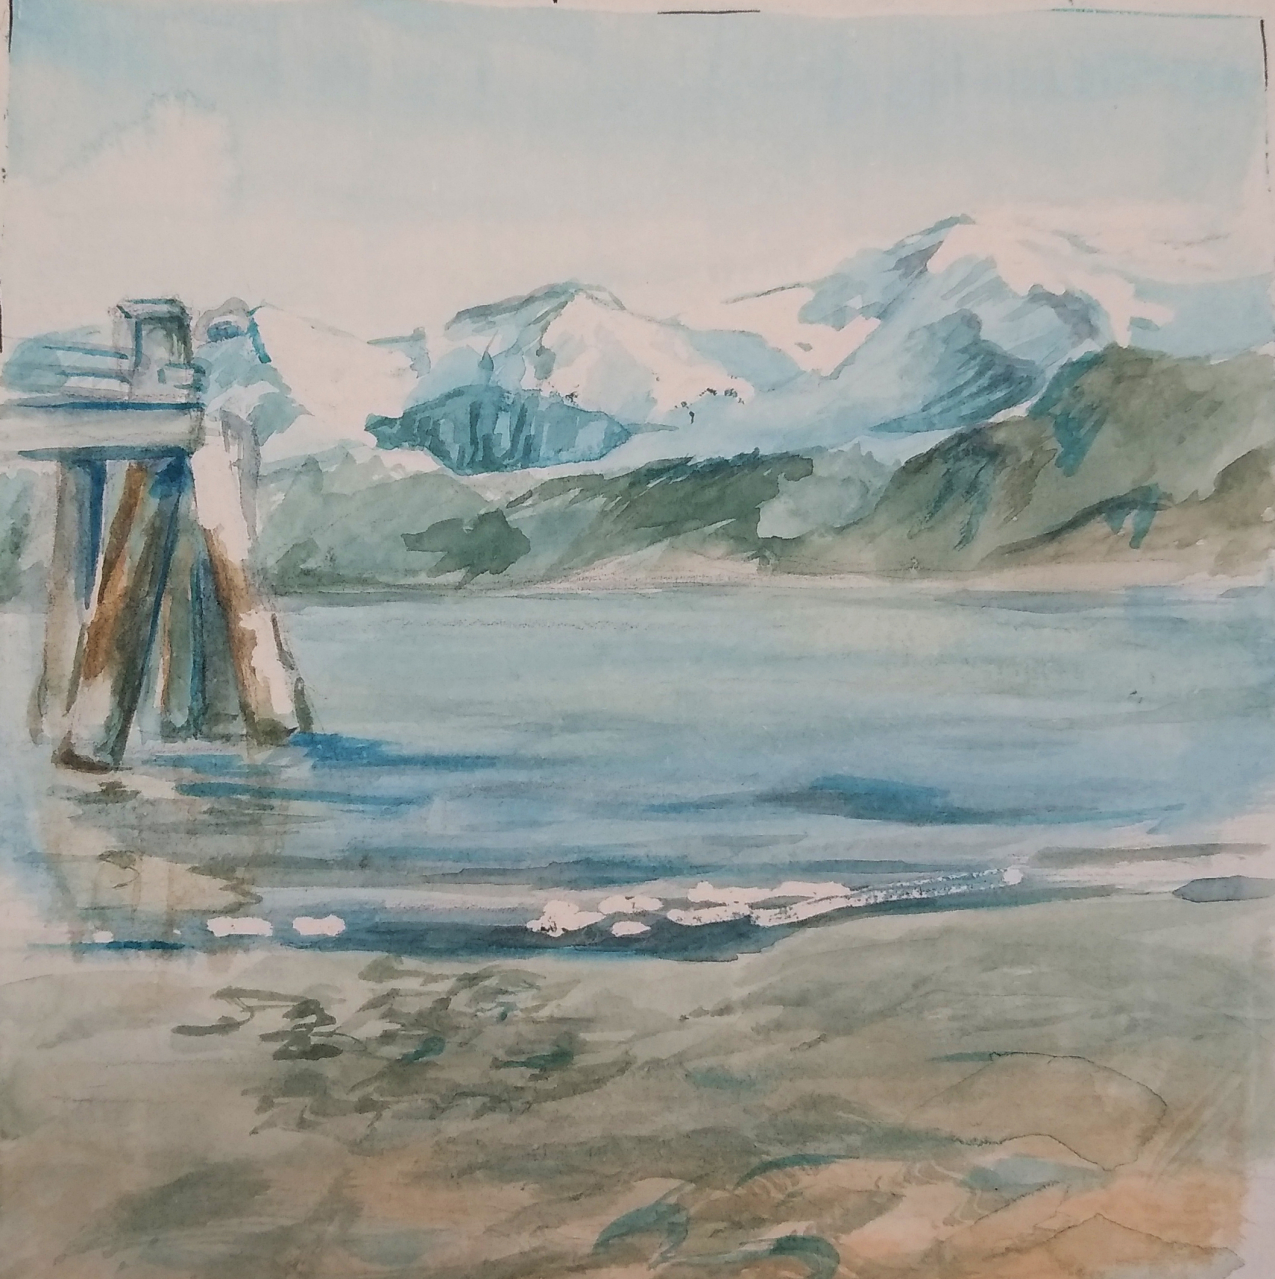 A calm watercolor painting of coastal waters with a mountain range in the background. The water is painted calmly, with a gentle tide.